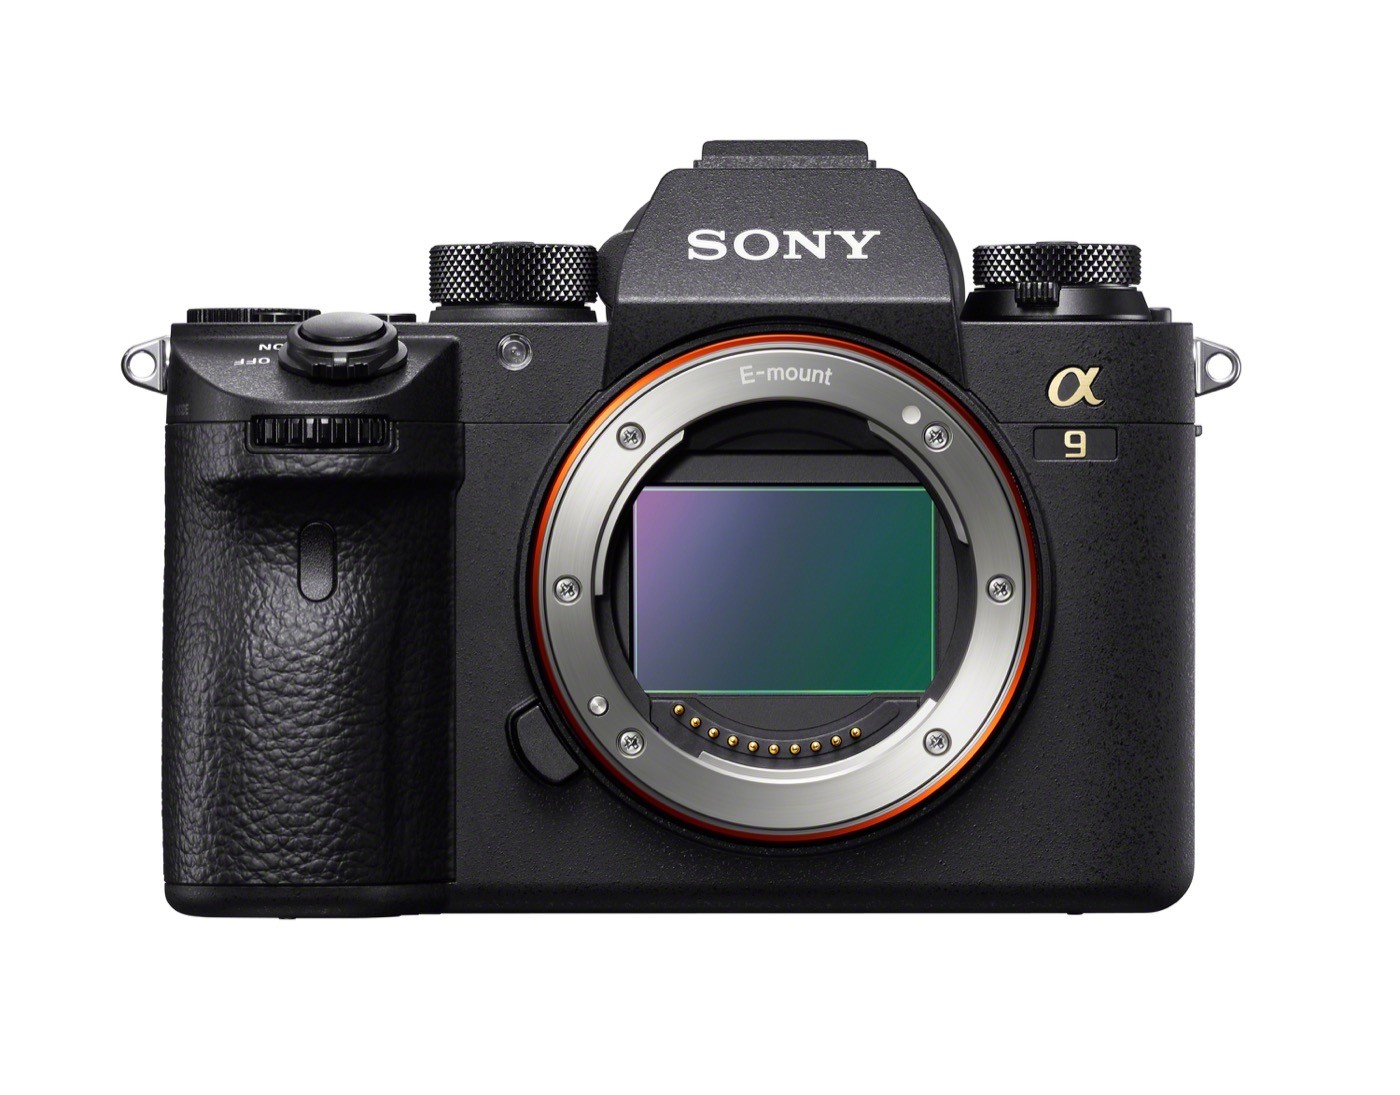 How To Update Sony Camera Firmware